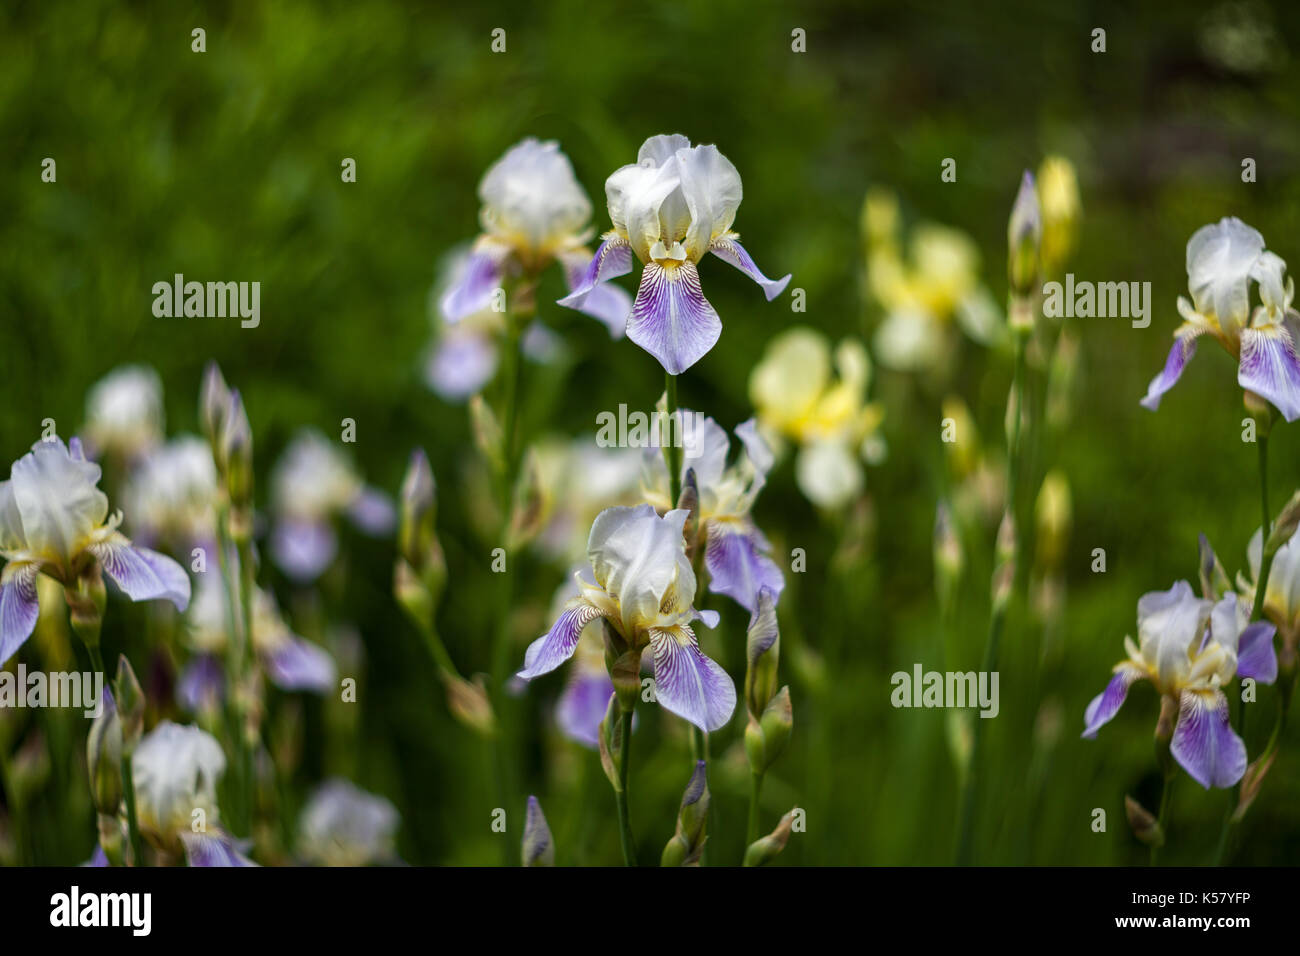 Many lilac iris flowers growing in the garden. Some flowers in focus. Blurred background. Russian lens blur. Helios bokeh. Stock Photo